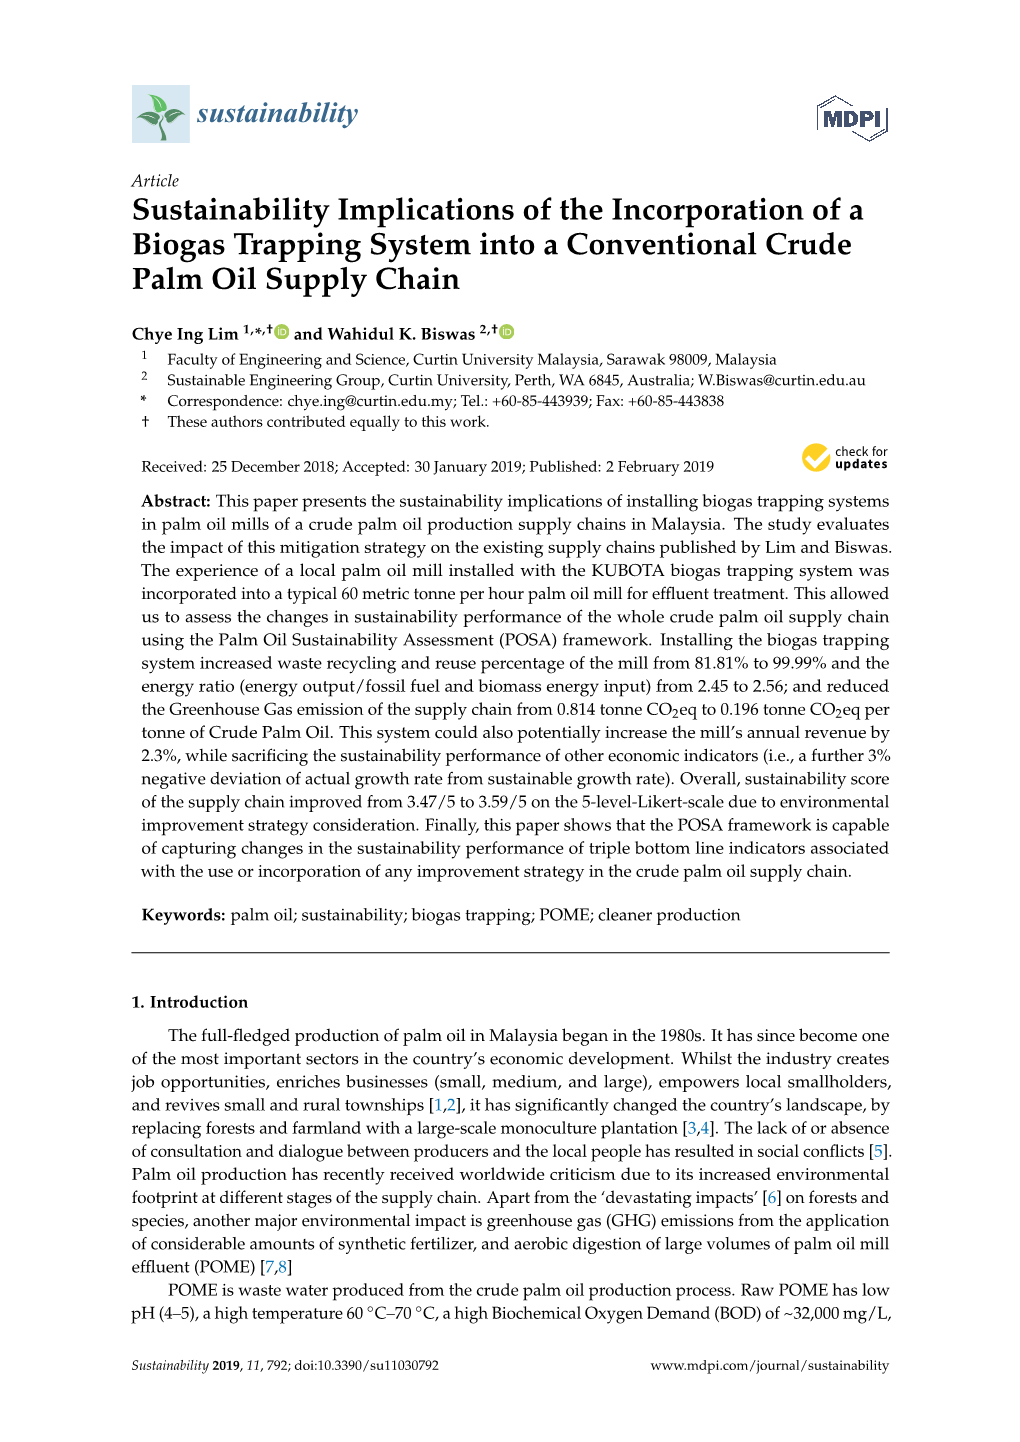 Sustainability Implications of the Incorporation of a Biogas Trapping System Into a Conventional Crude Palm Oil Supply Chain